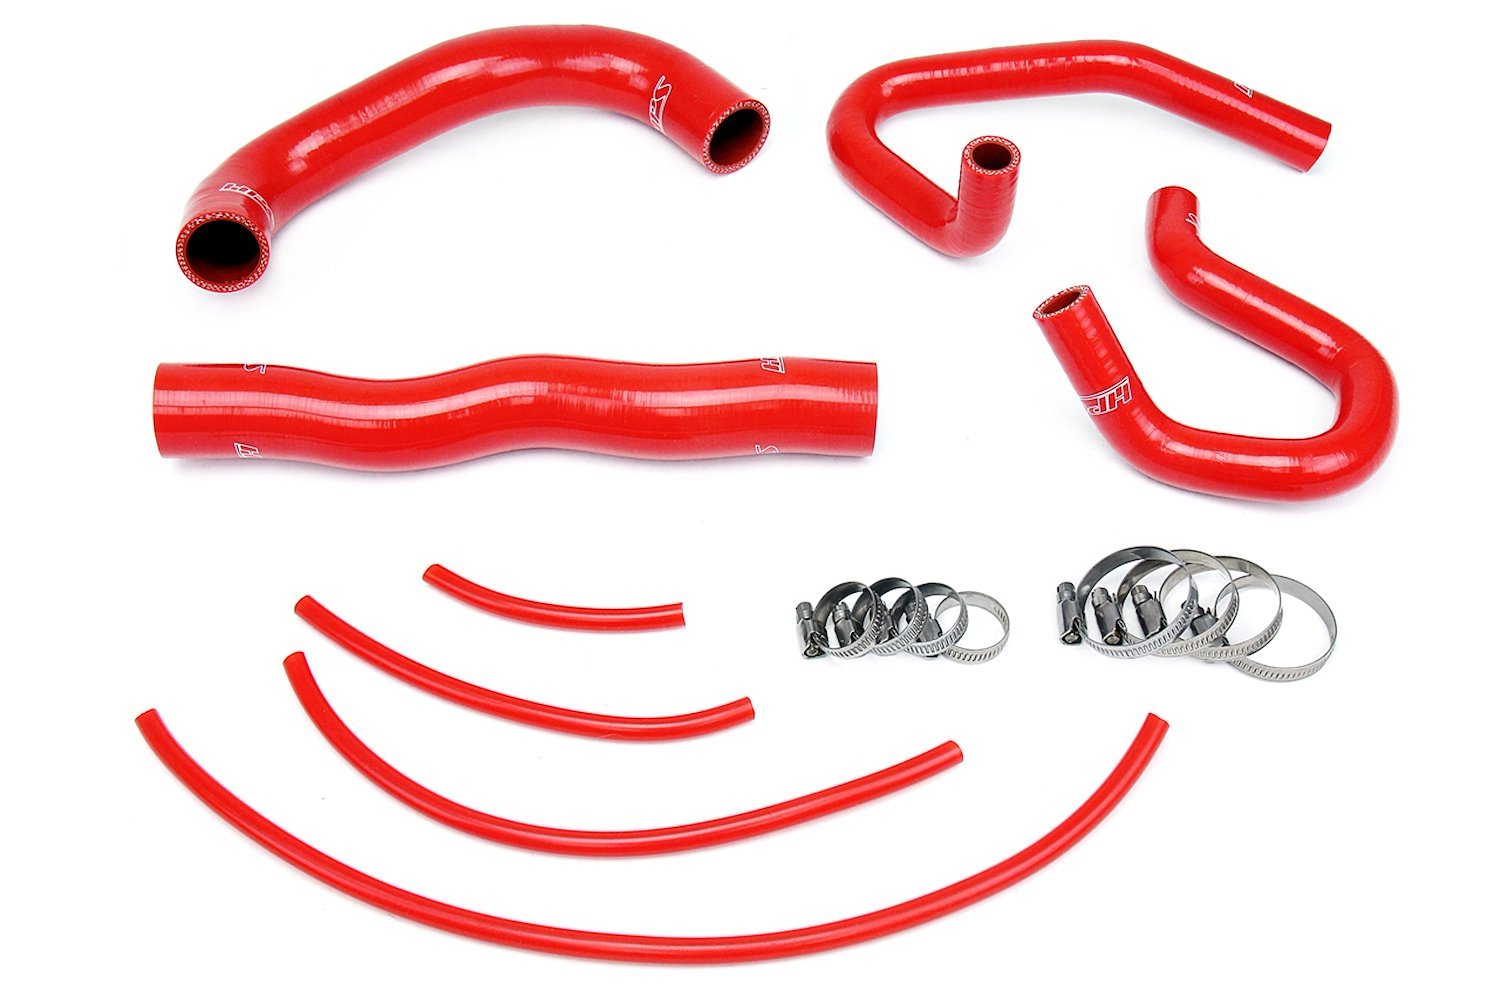 57-1324-RED Coolant Hose Kit, High-Temp 3-Ply Reinforced Silicone, Replace Rubber Radiator Heater Coolant Hoses